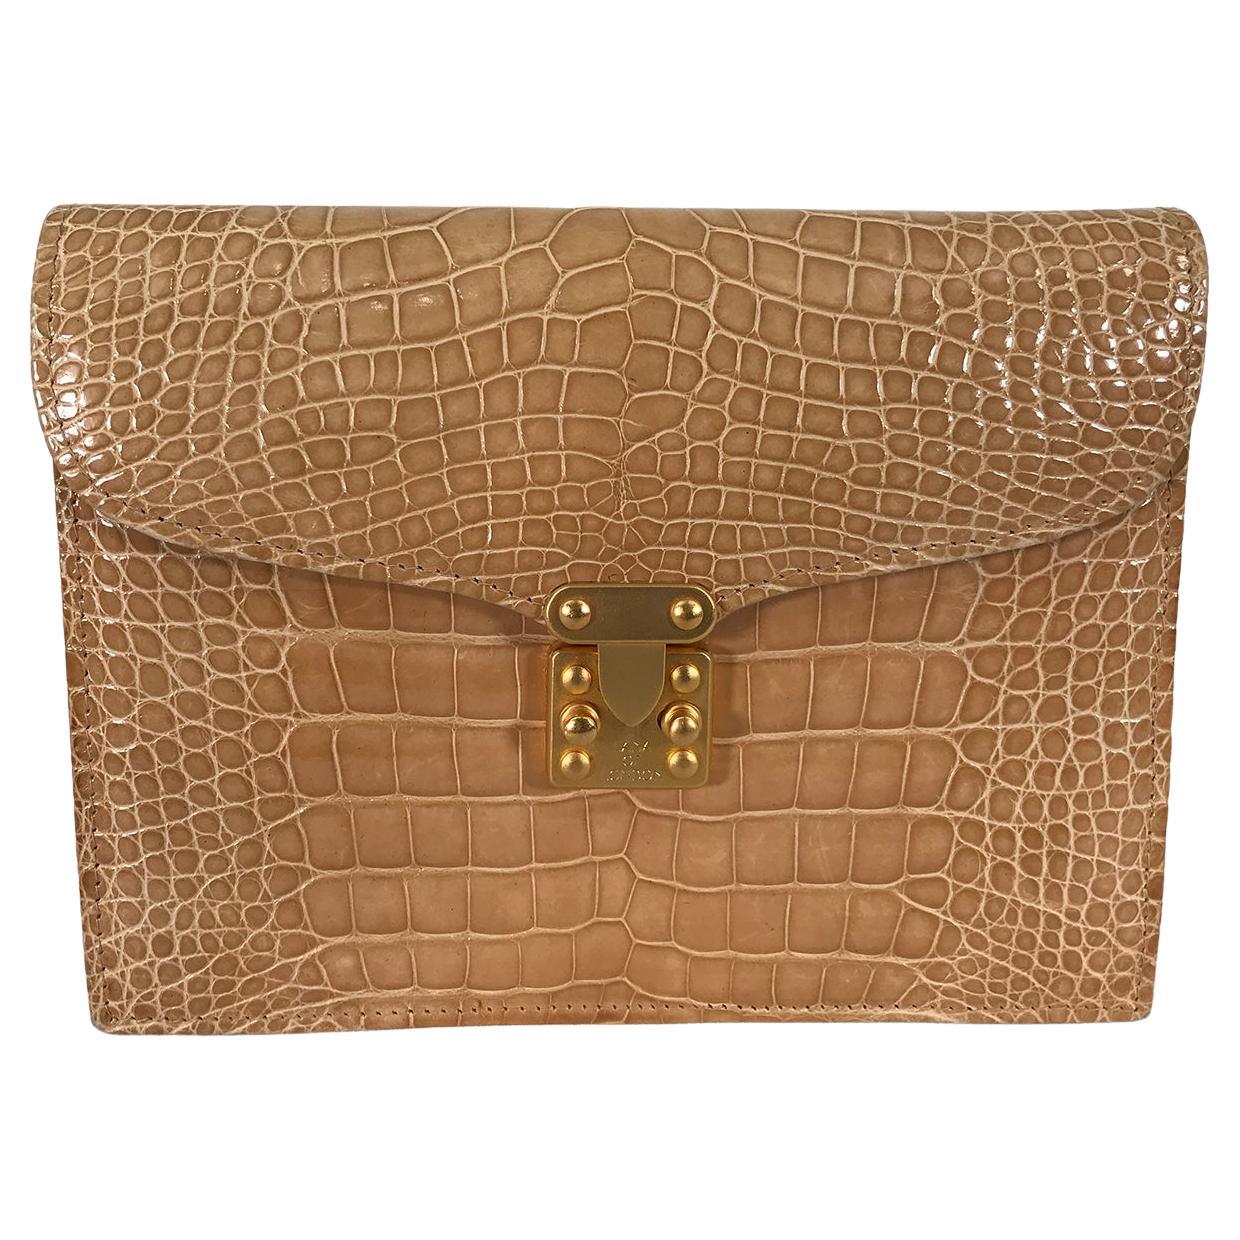 Lana of London blond alligator clutch or shoulder bag with a detachable gold box chain. Beautiful light golden blond bag has a flap front with matte gold tab & button closure. The bag is perfect for afternoon & evening. Lana of London was a